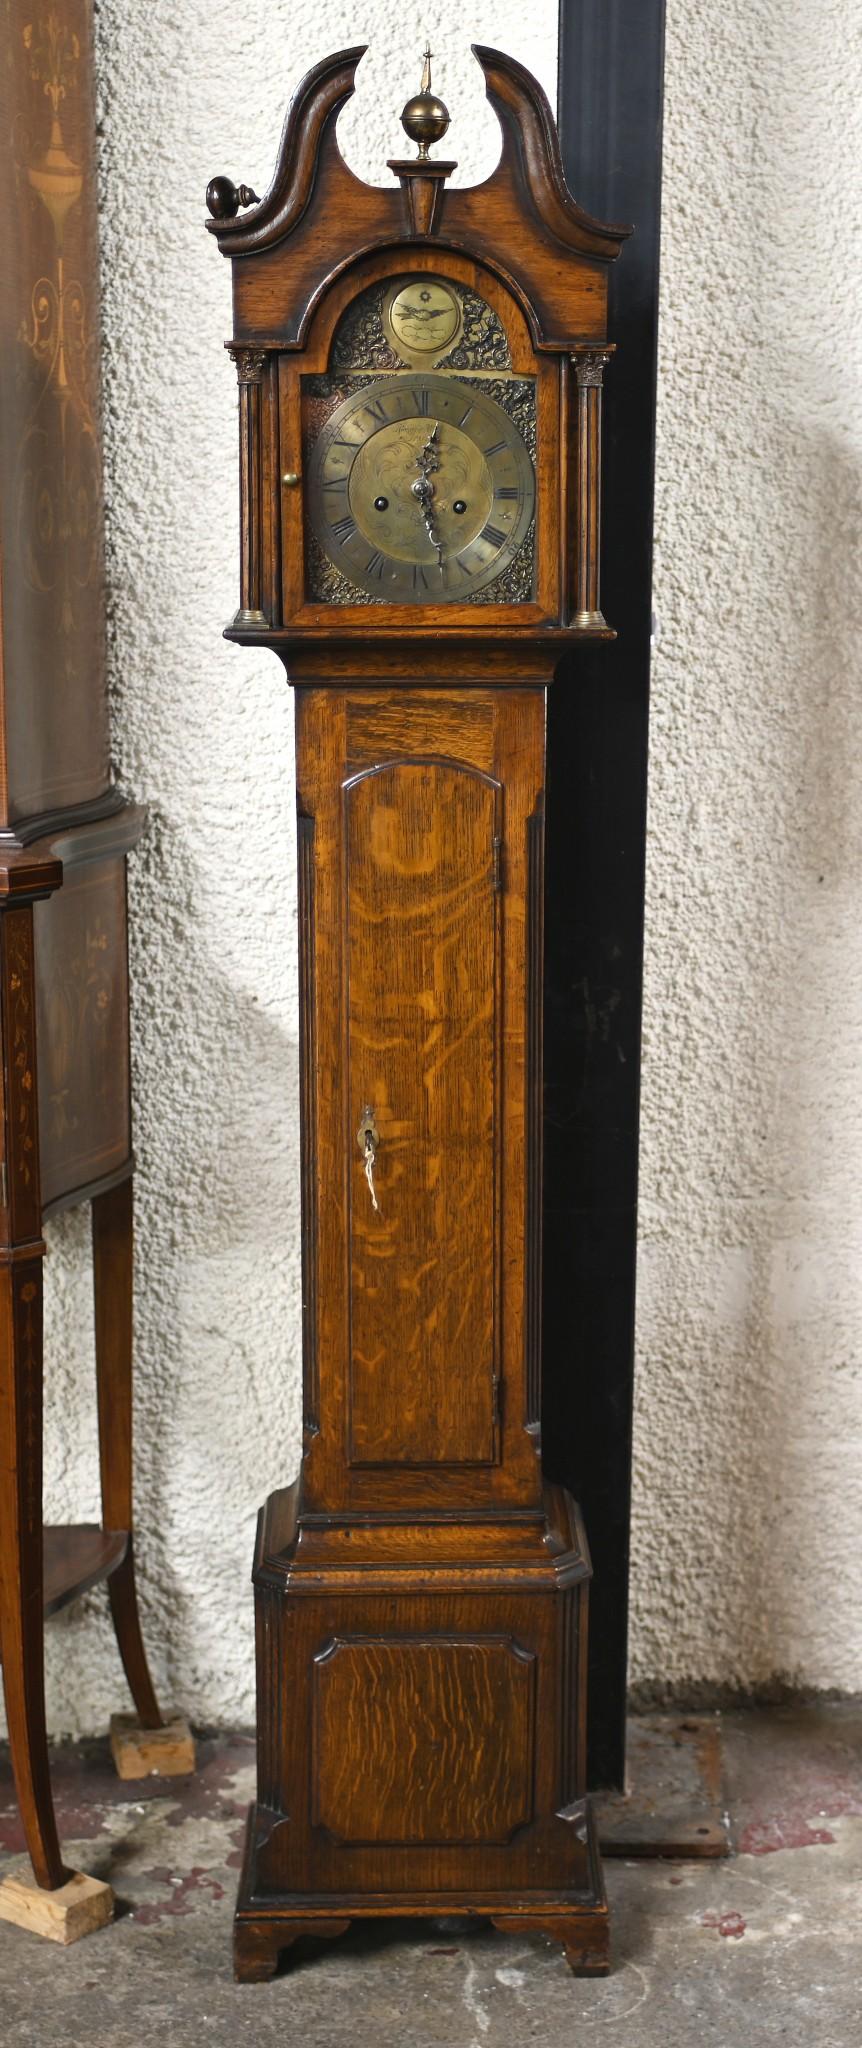 Refined English grandmother clock in mahogany
Made by Richard Wells of Truro in Cornwall
Broken arch pediment to top
We can ship to anywhere in the world 
Offered in great shape ready for home use right away.